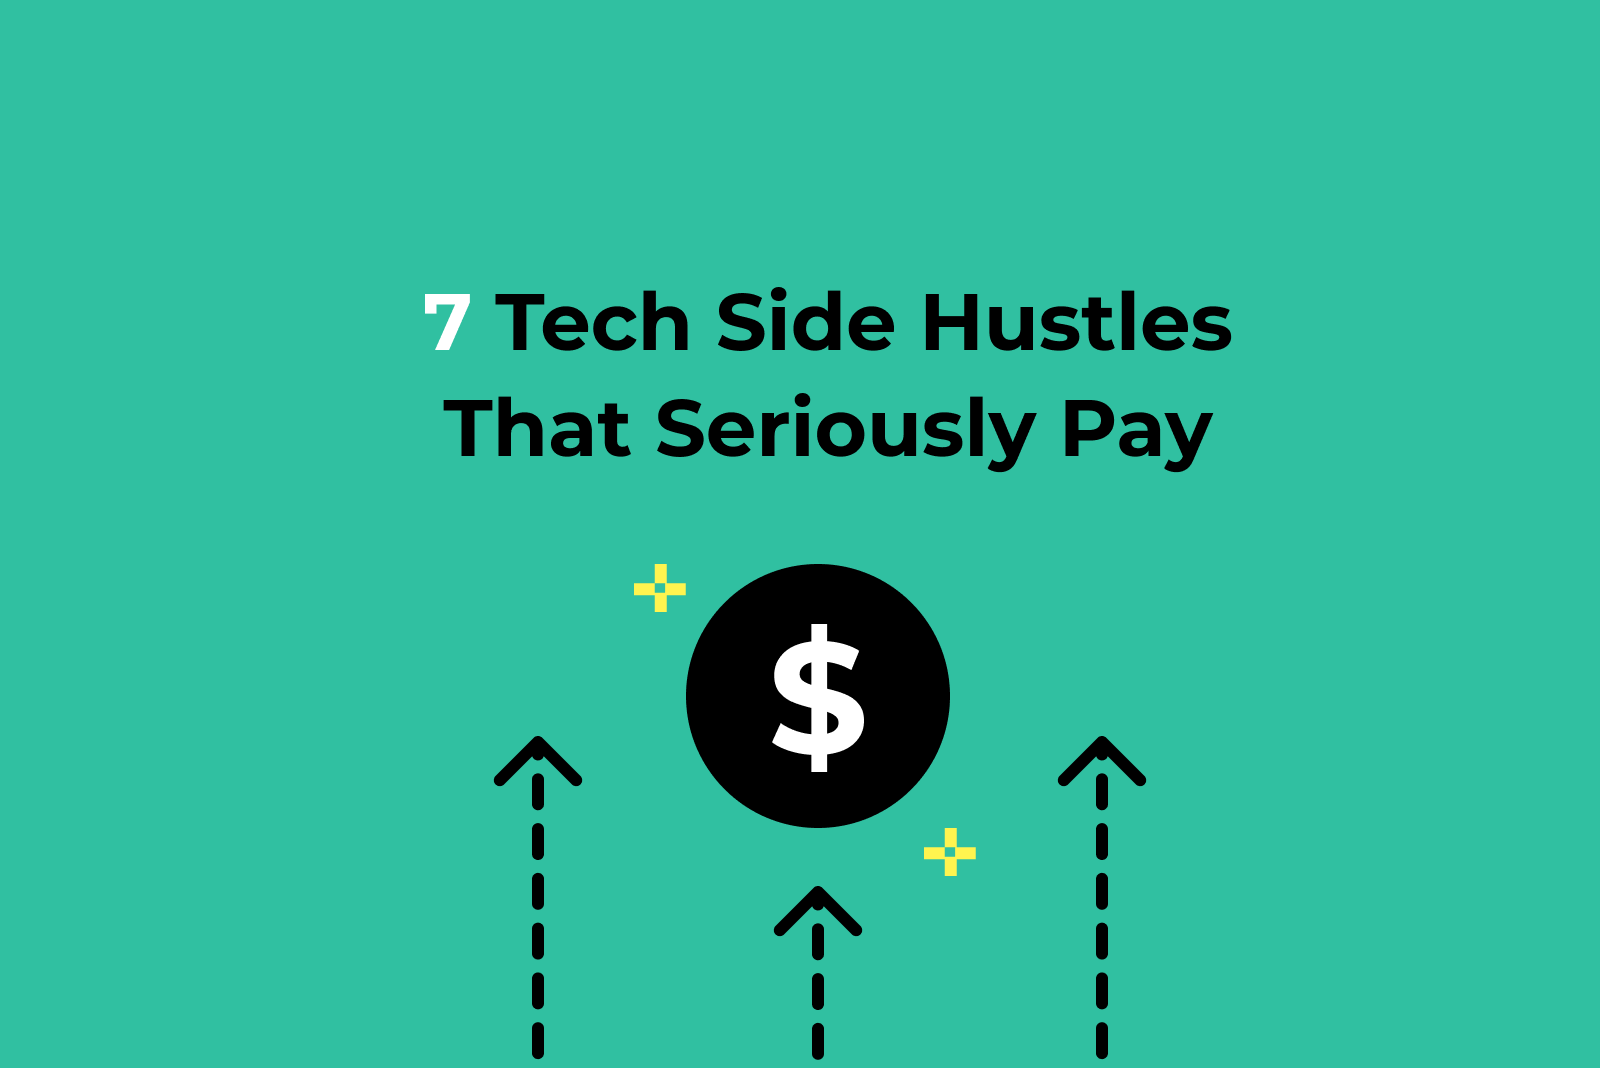 7 Tech Side Hustles That Seriously Pay